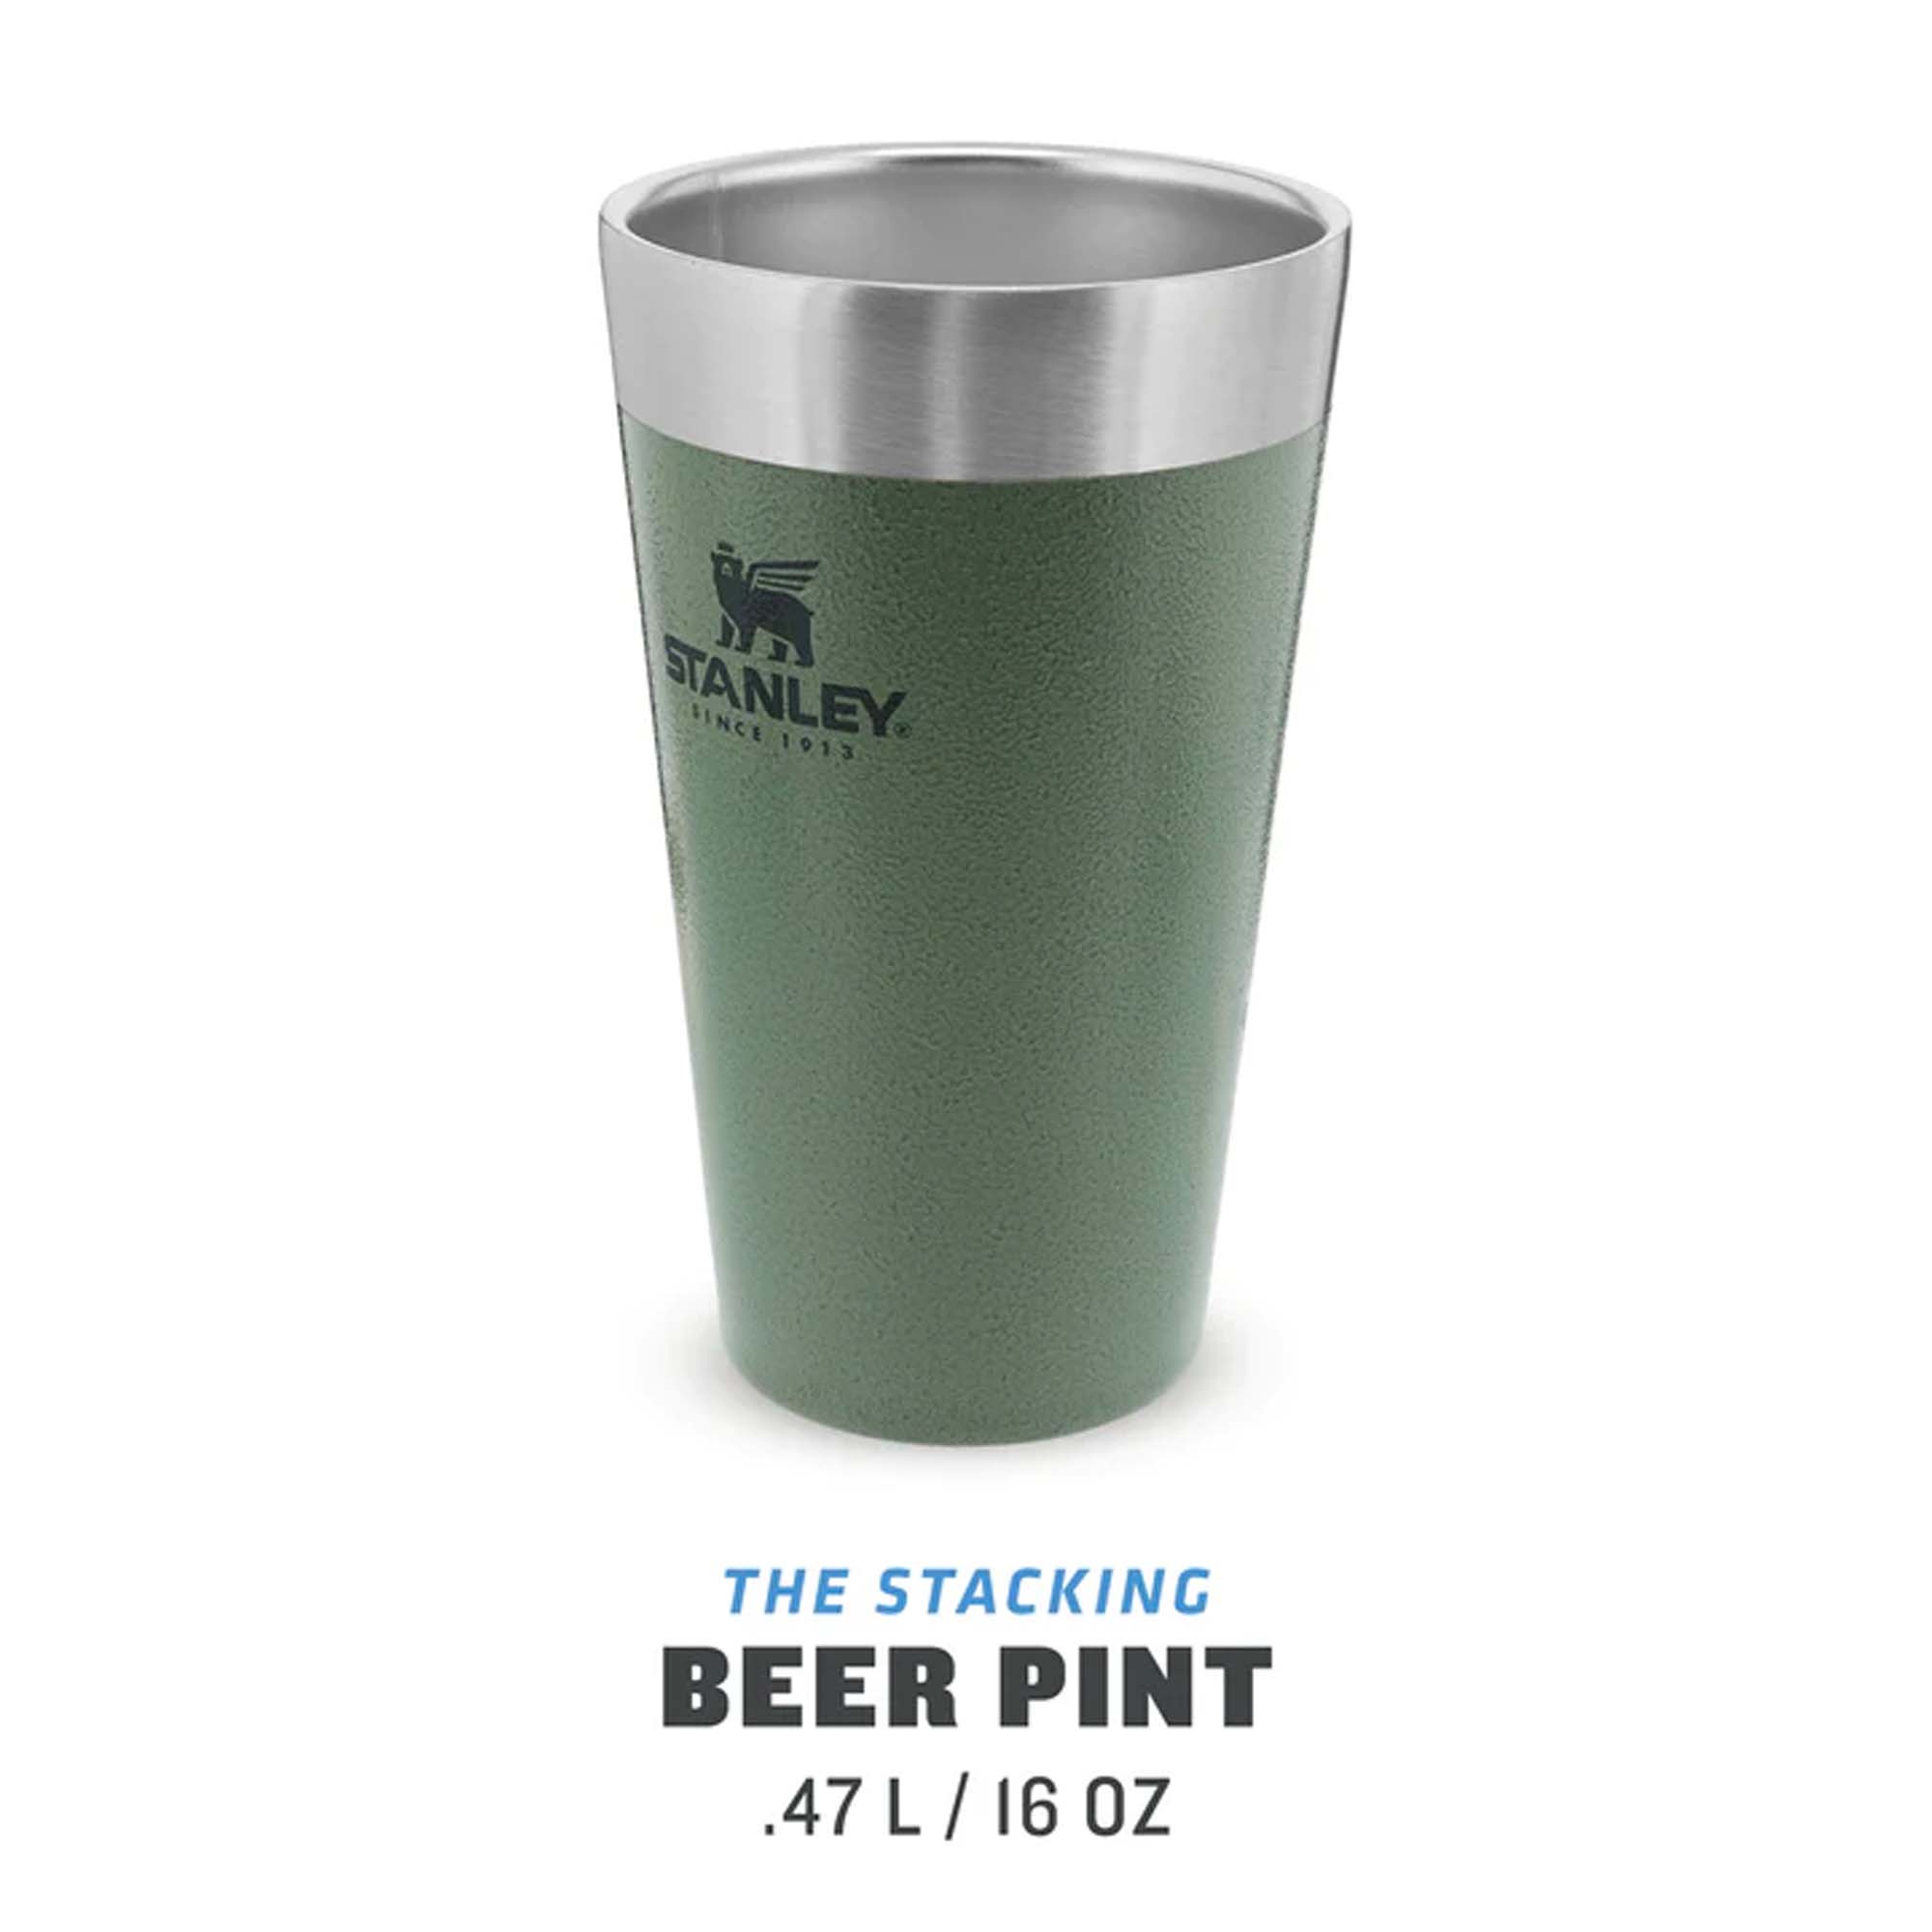 STANLEY The Stacking Beer Pint .47L / 16oz